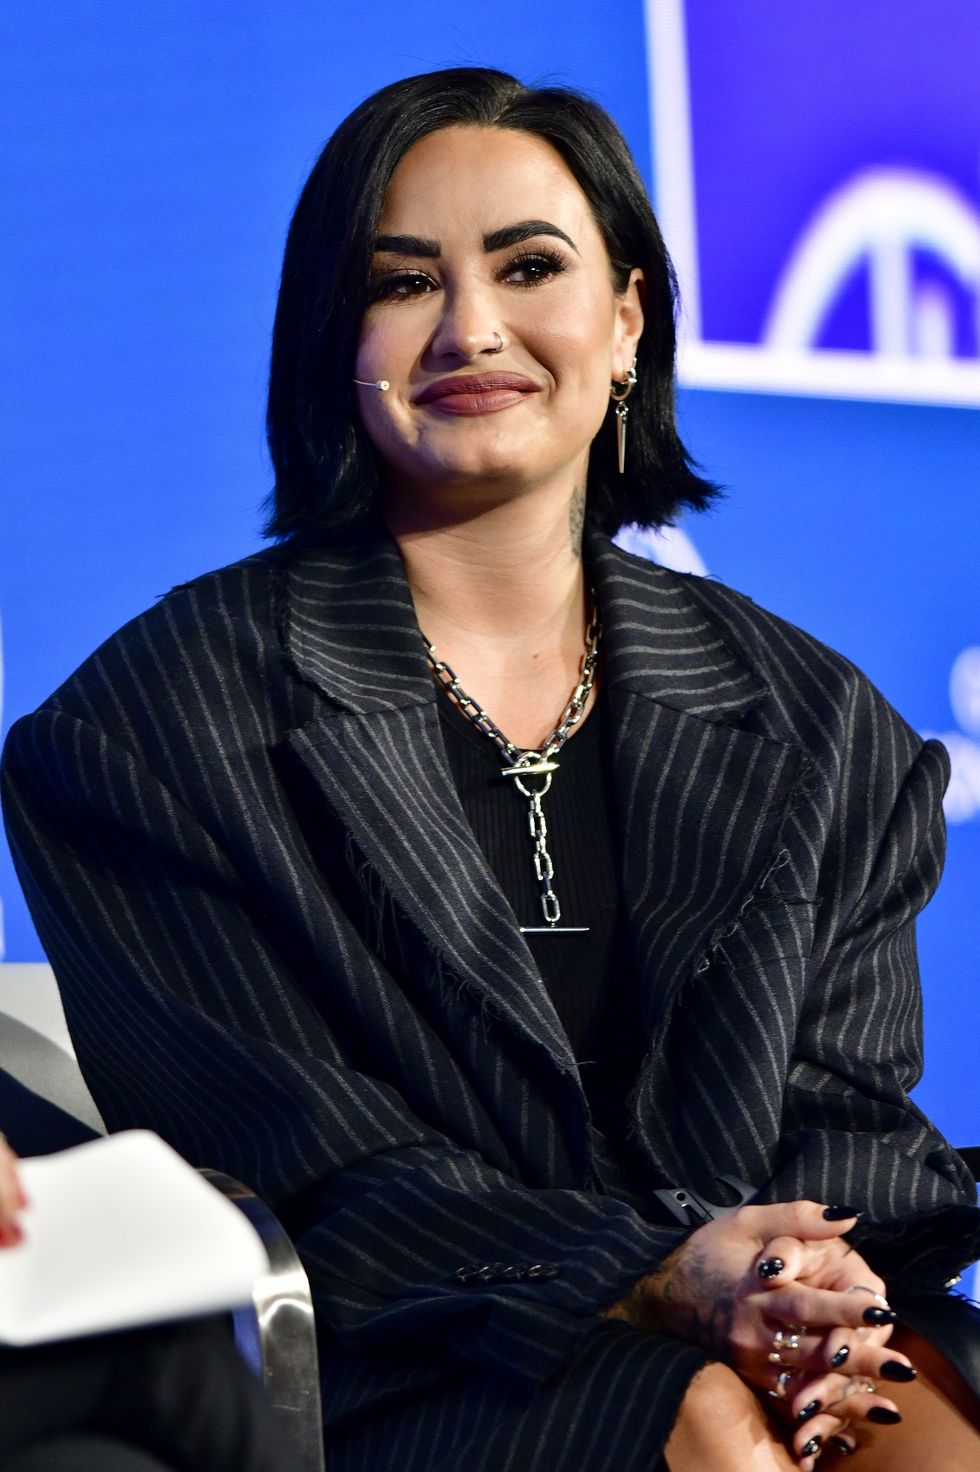 demi lovato attends the 2023 milken institute global conference at beverly hilton on may 03, 2023 in beverly hills, california